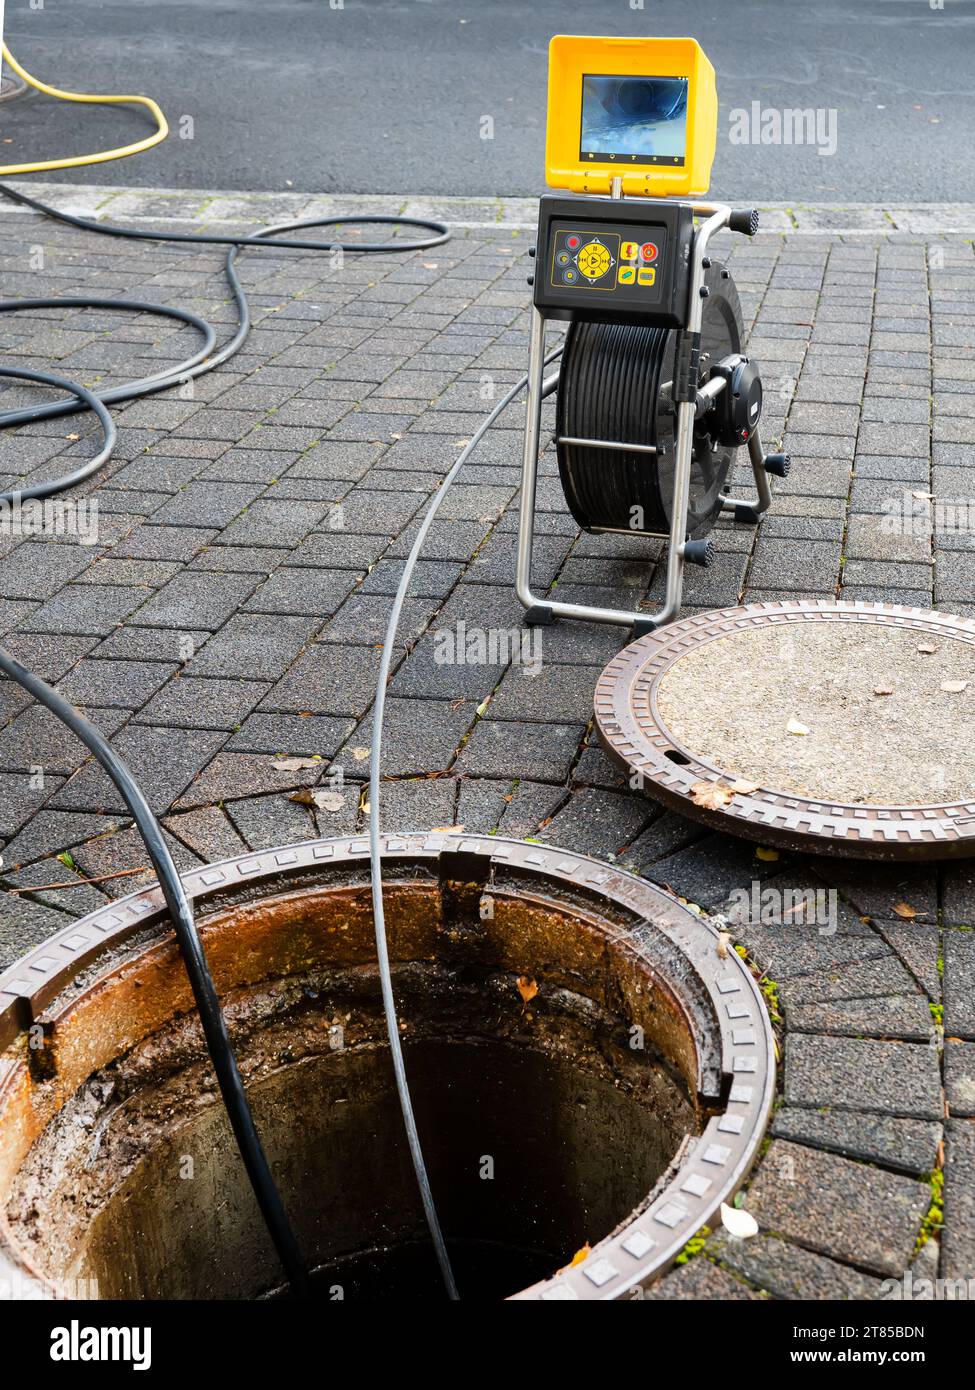 A drain cleaning company checks a blocked drain with a camera before flushing it out Stock Photo